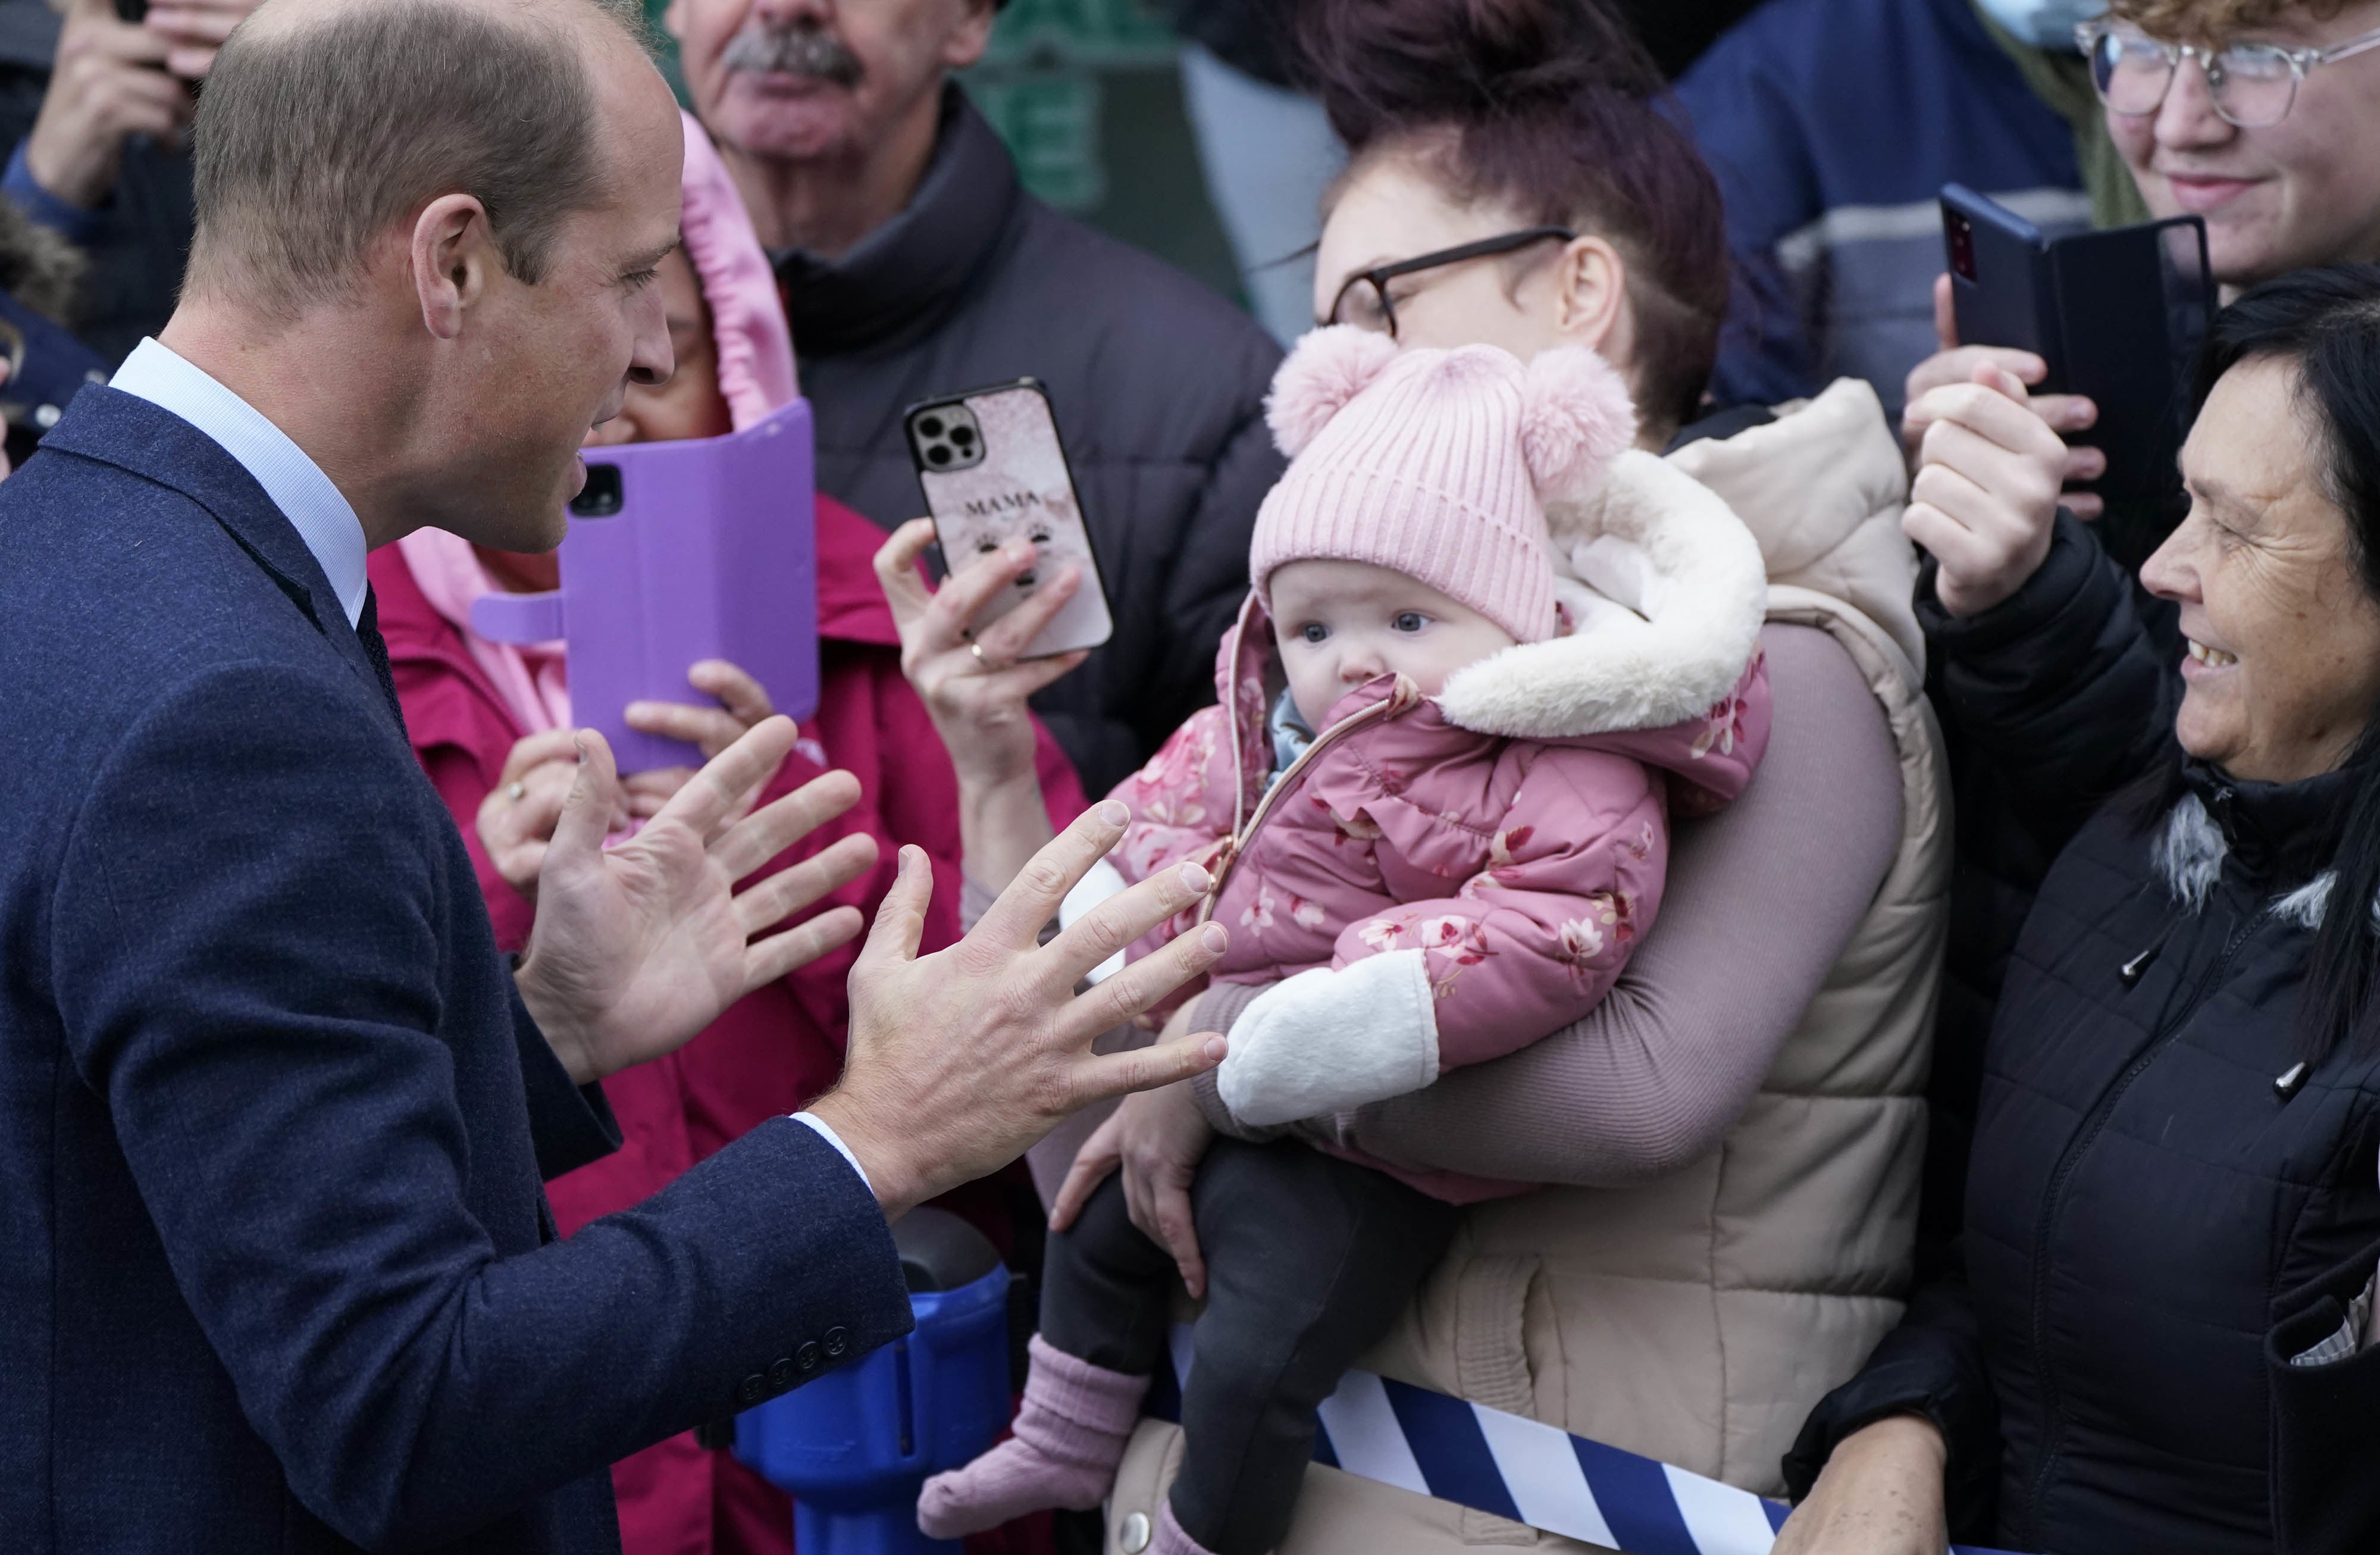 The Prince of Wales meets members of the public during a visit to Holyhead Marine Cafe and Bar in Holyhead, Wales (Danny Lawson/PA)